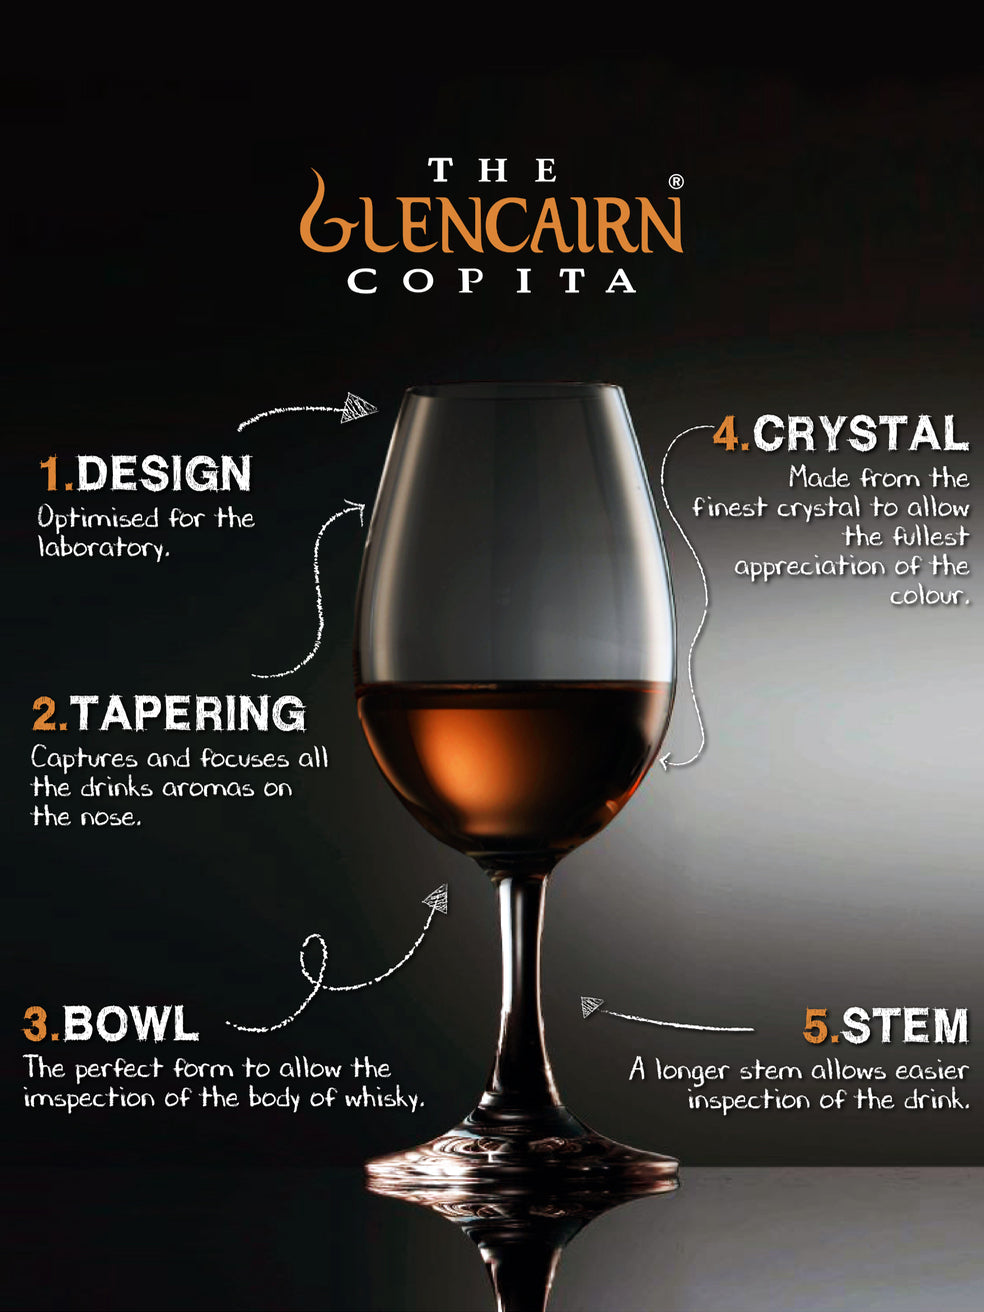 About the Copita crystal glass by Glencairn